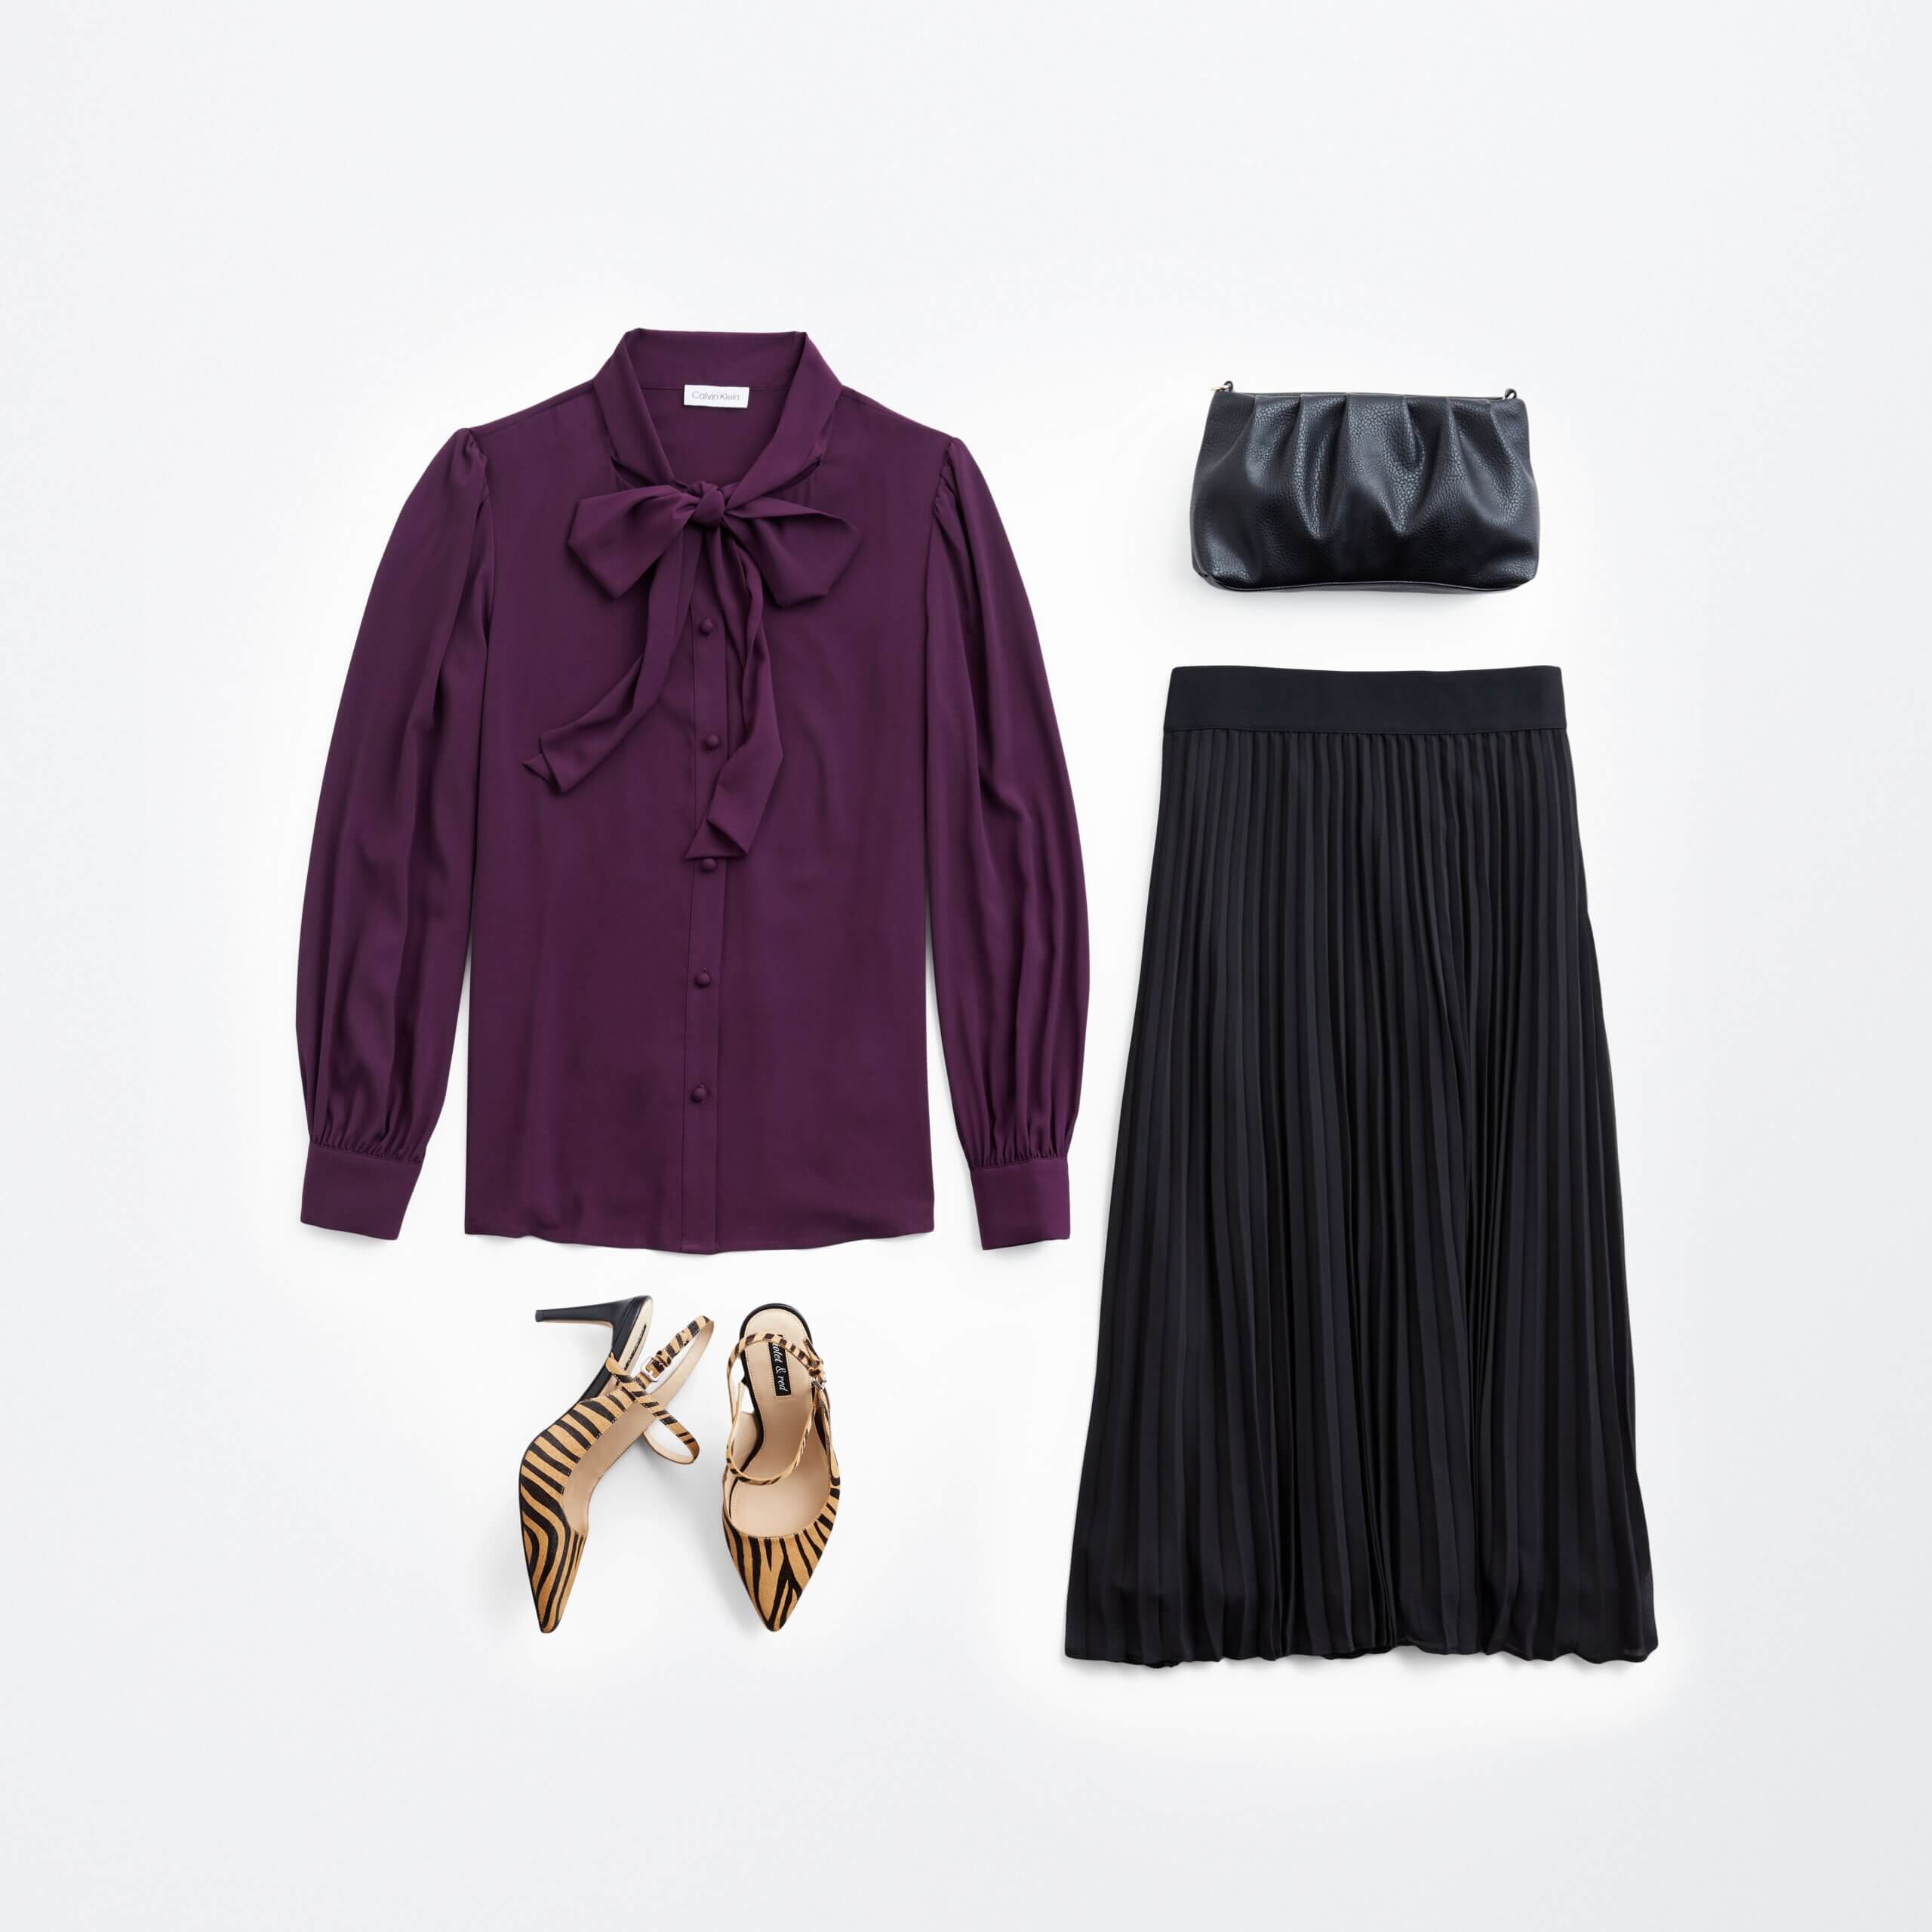 Stitch Fix women’s holiday party outfit featuring black pleated maxi skirt, purple tie-neck blouse, black clutch and tiger-print heels.